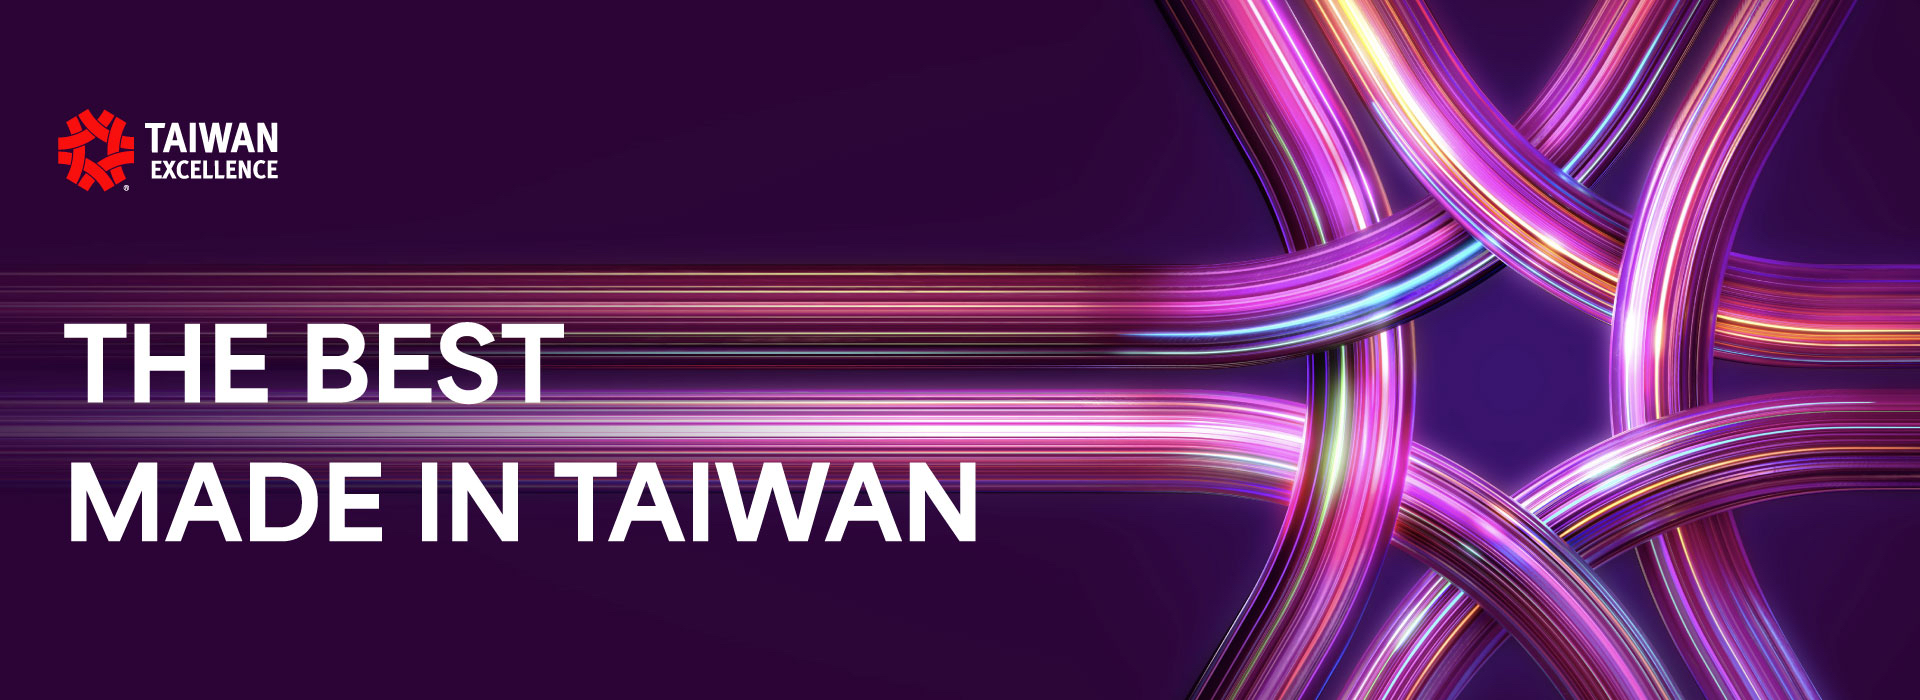 Taiwanexcellence